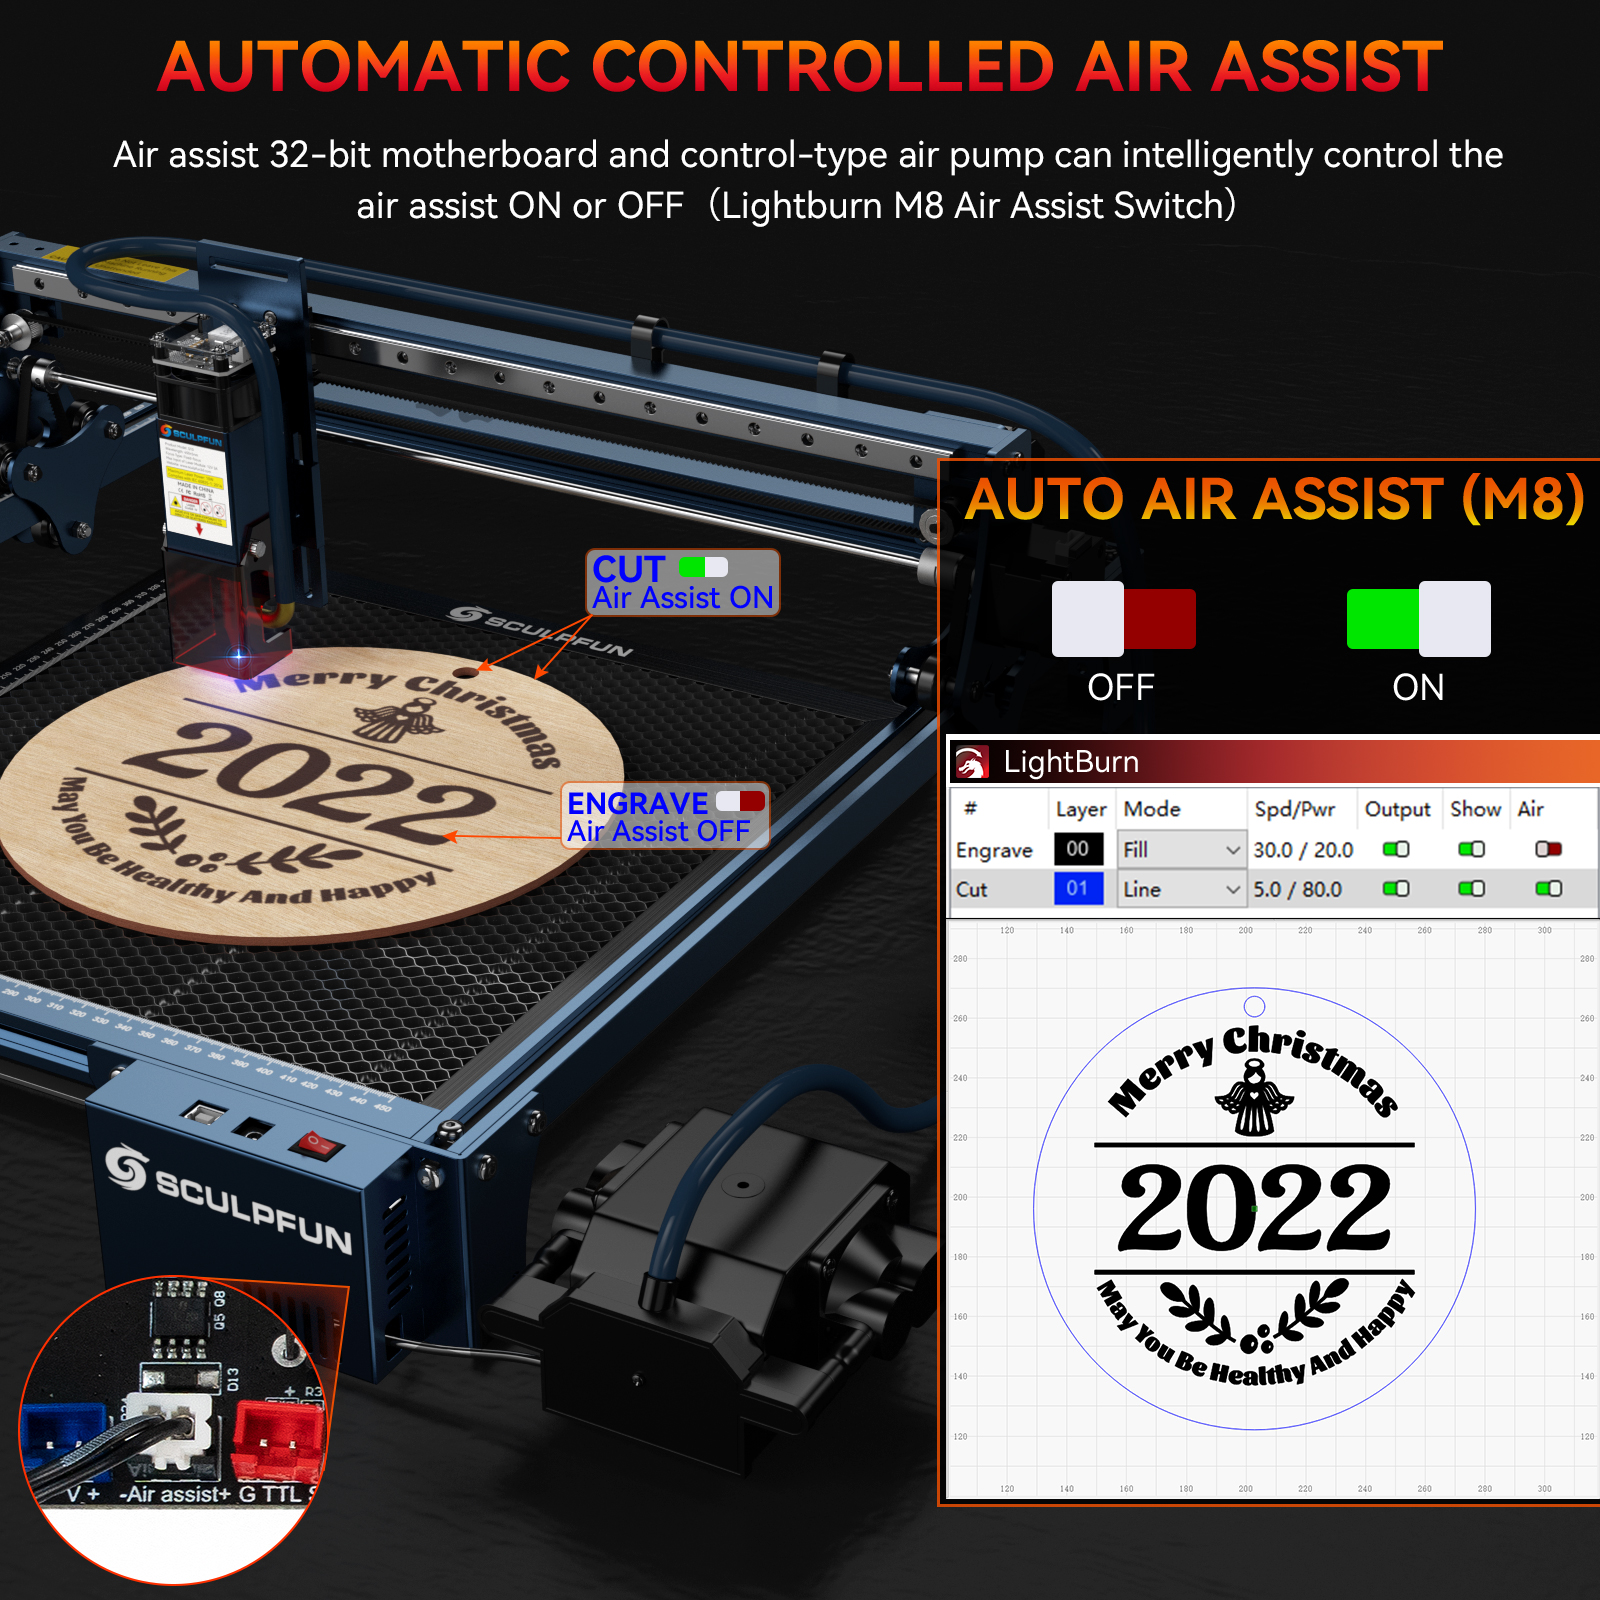 SCULPFUN Automatic Air Assist Kit 12V Version   Suitable for upgrading S9/S10 to S30 automatic air assist system, including 32bit automatic air assist mainboard, 30min/min automatic air pump, 12V/7A adapter, installation kit